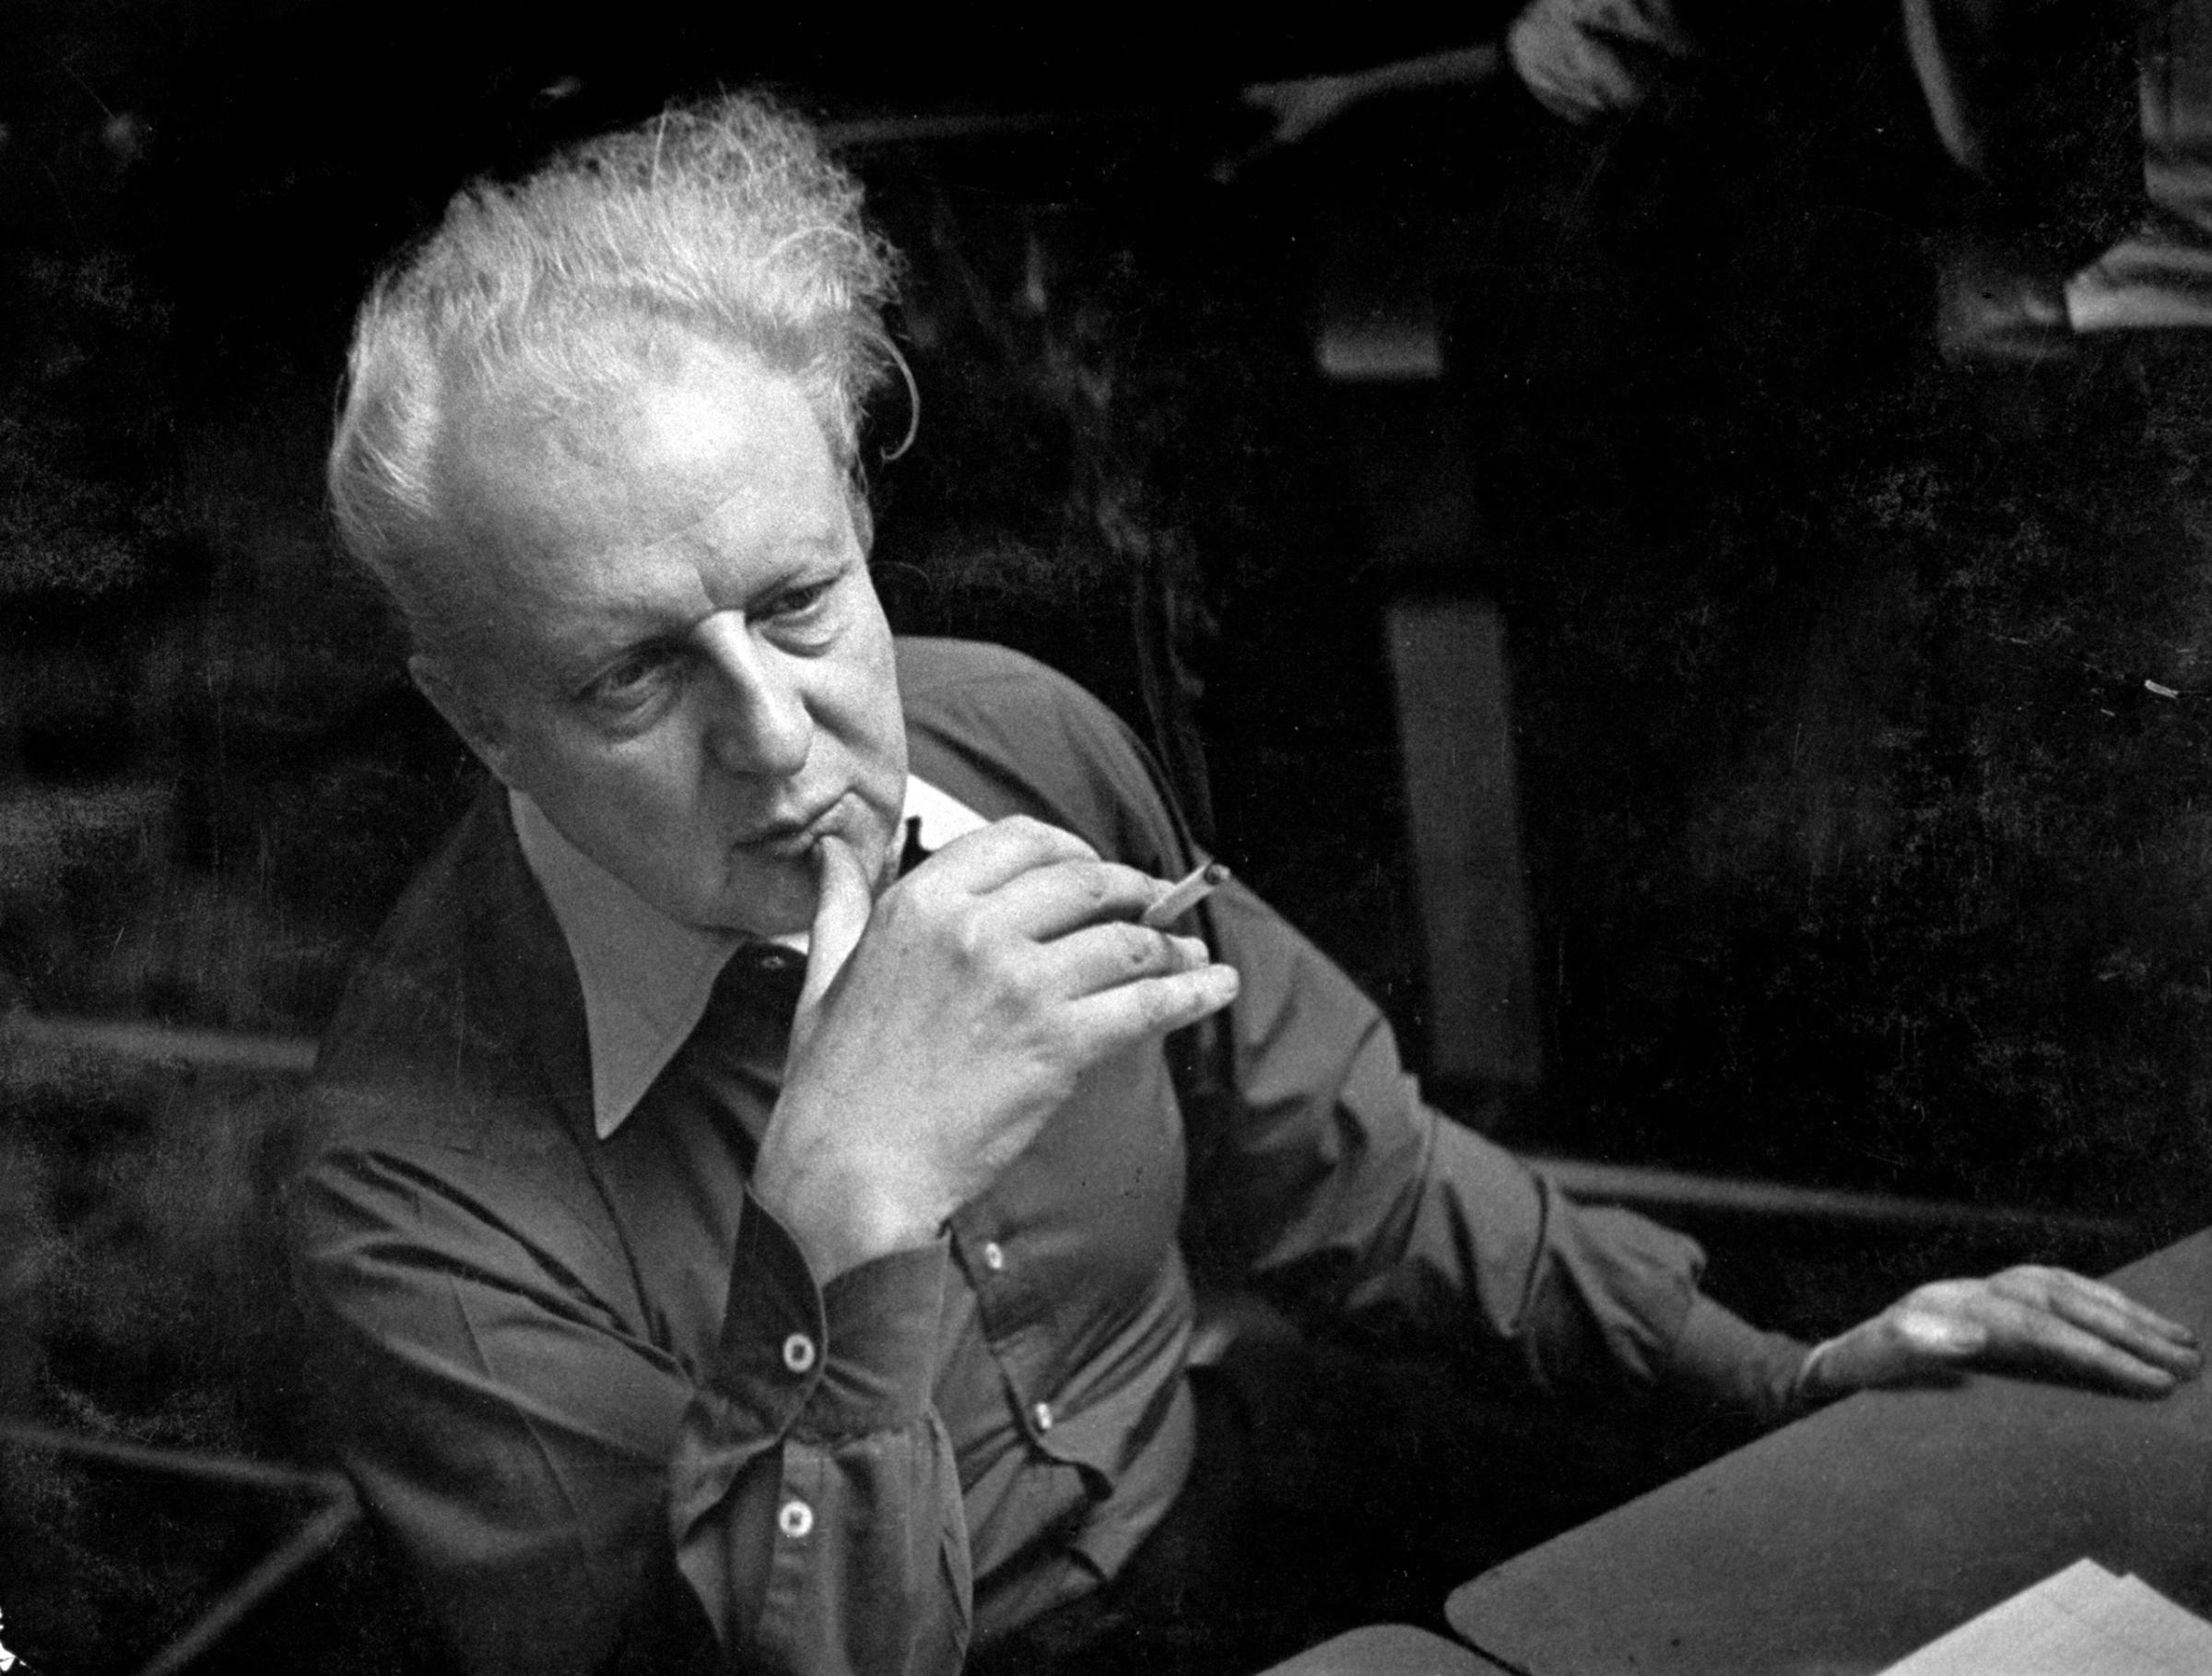 Leopold Stokowsky smokes a cigarette and listens during a recording session.